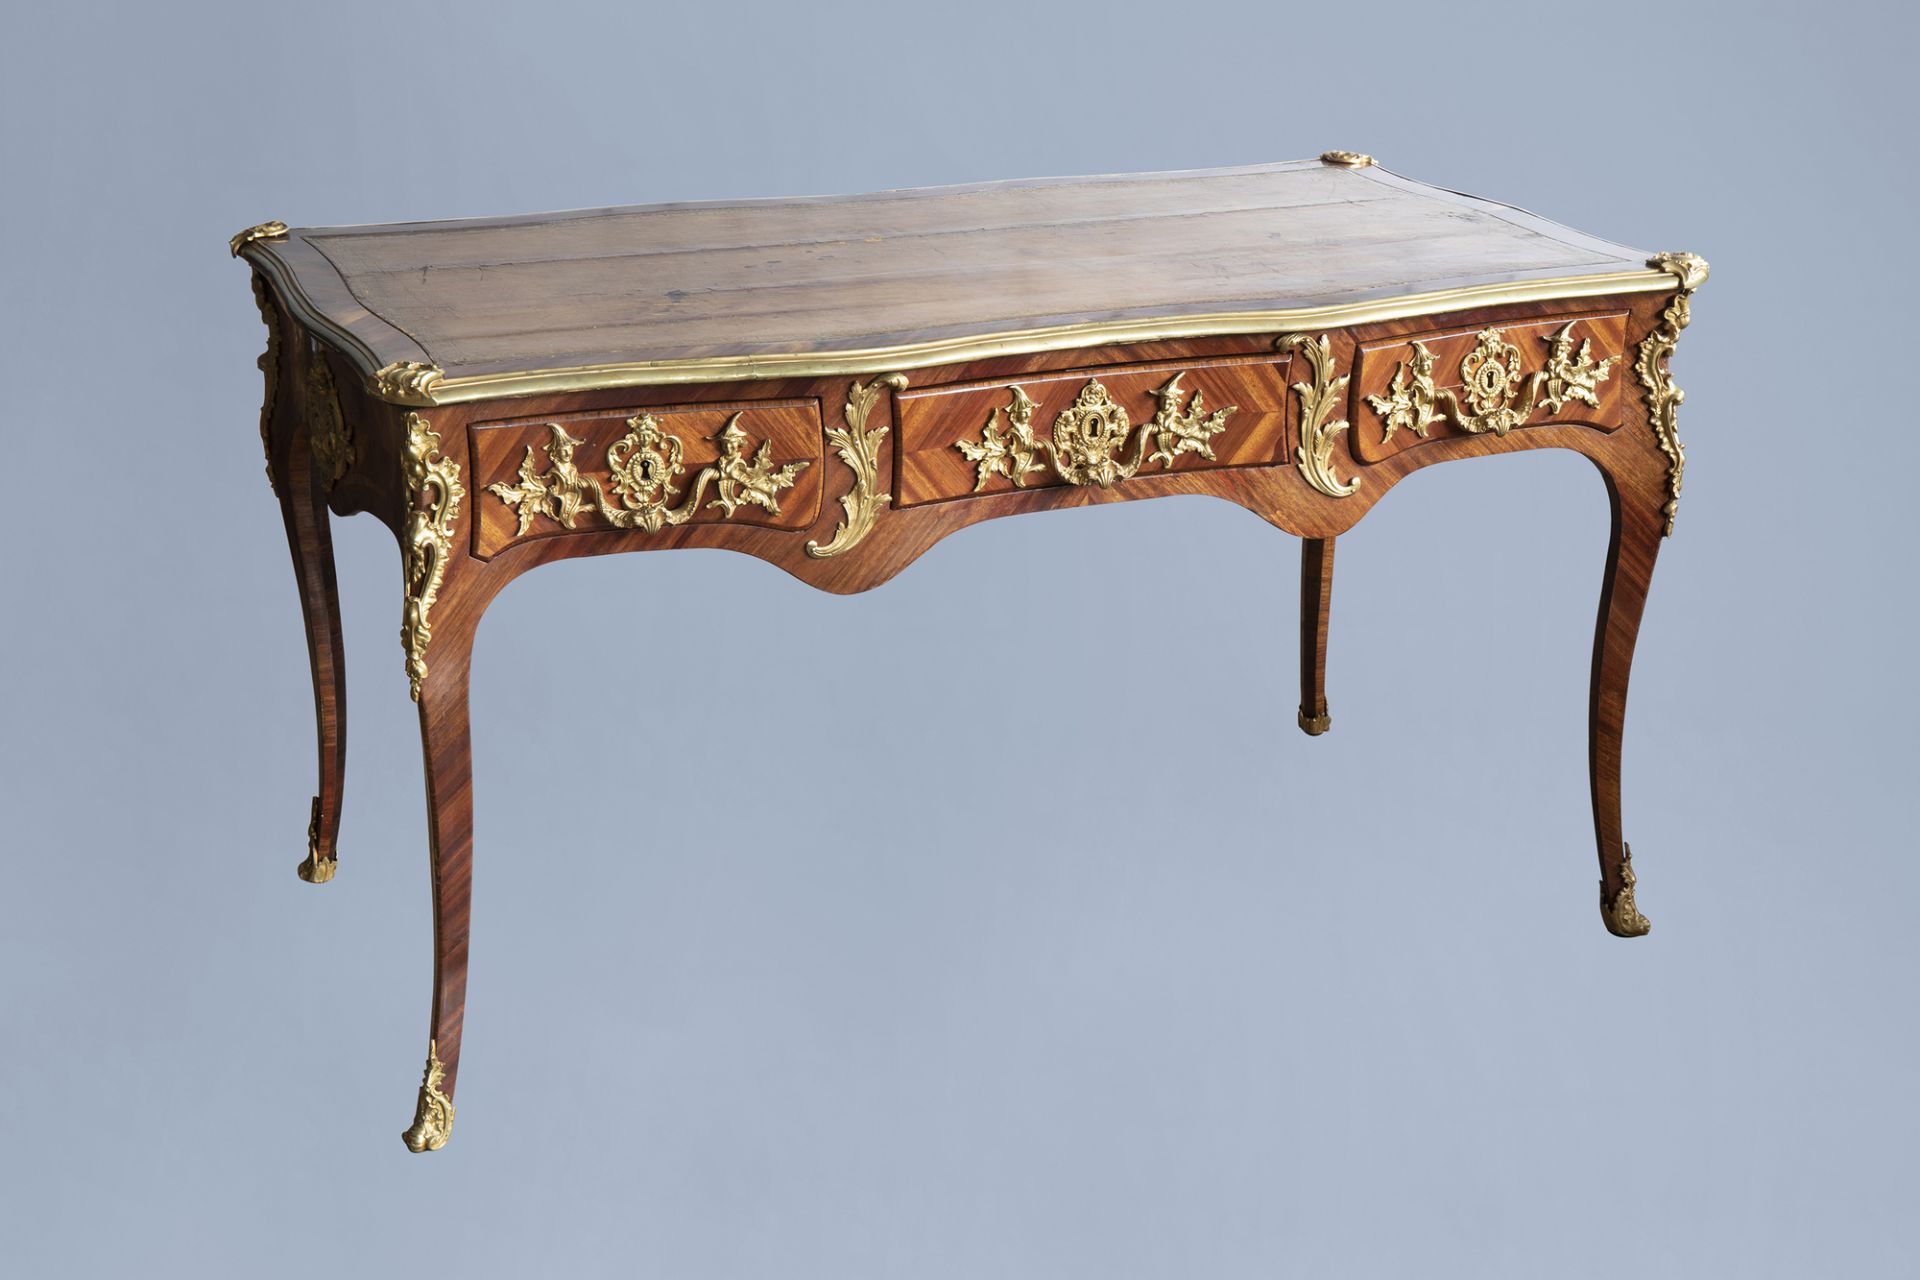 An extremely fine French Louis XV style gilt bronze chinoiserie mounted kingwood bureau plat, mid 18